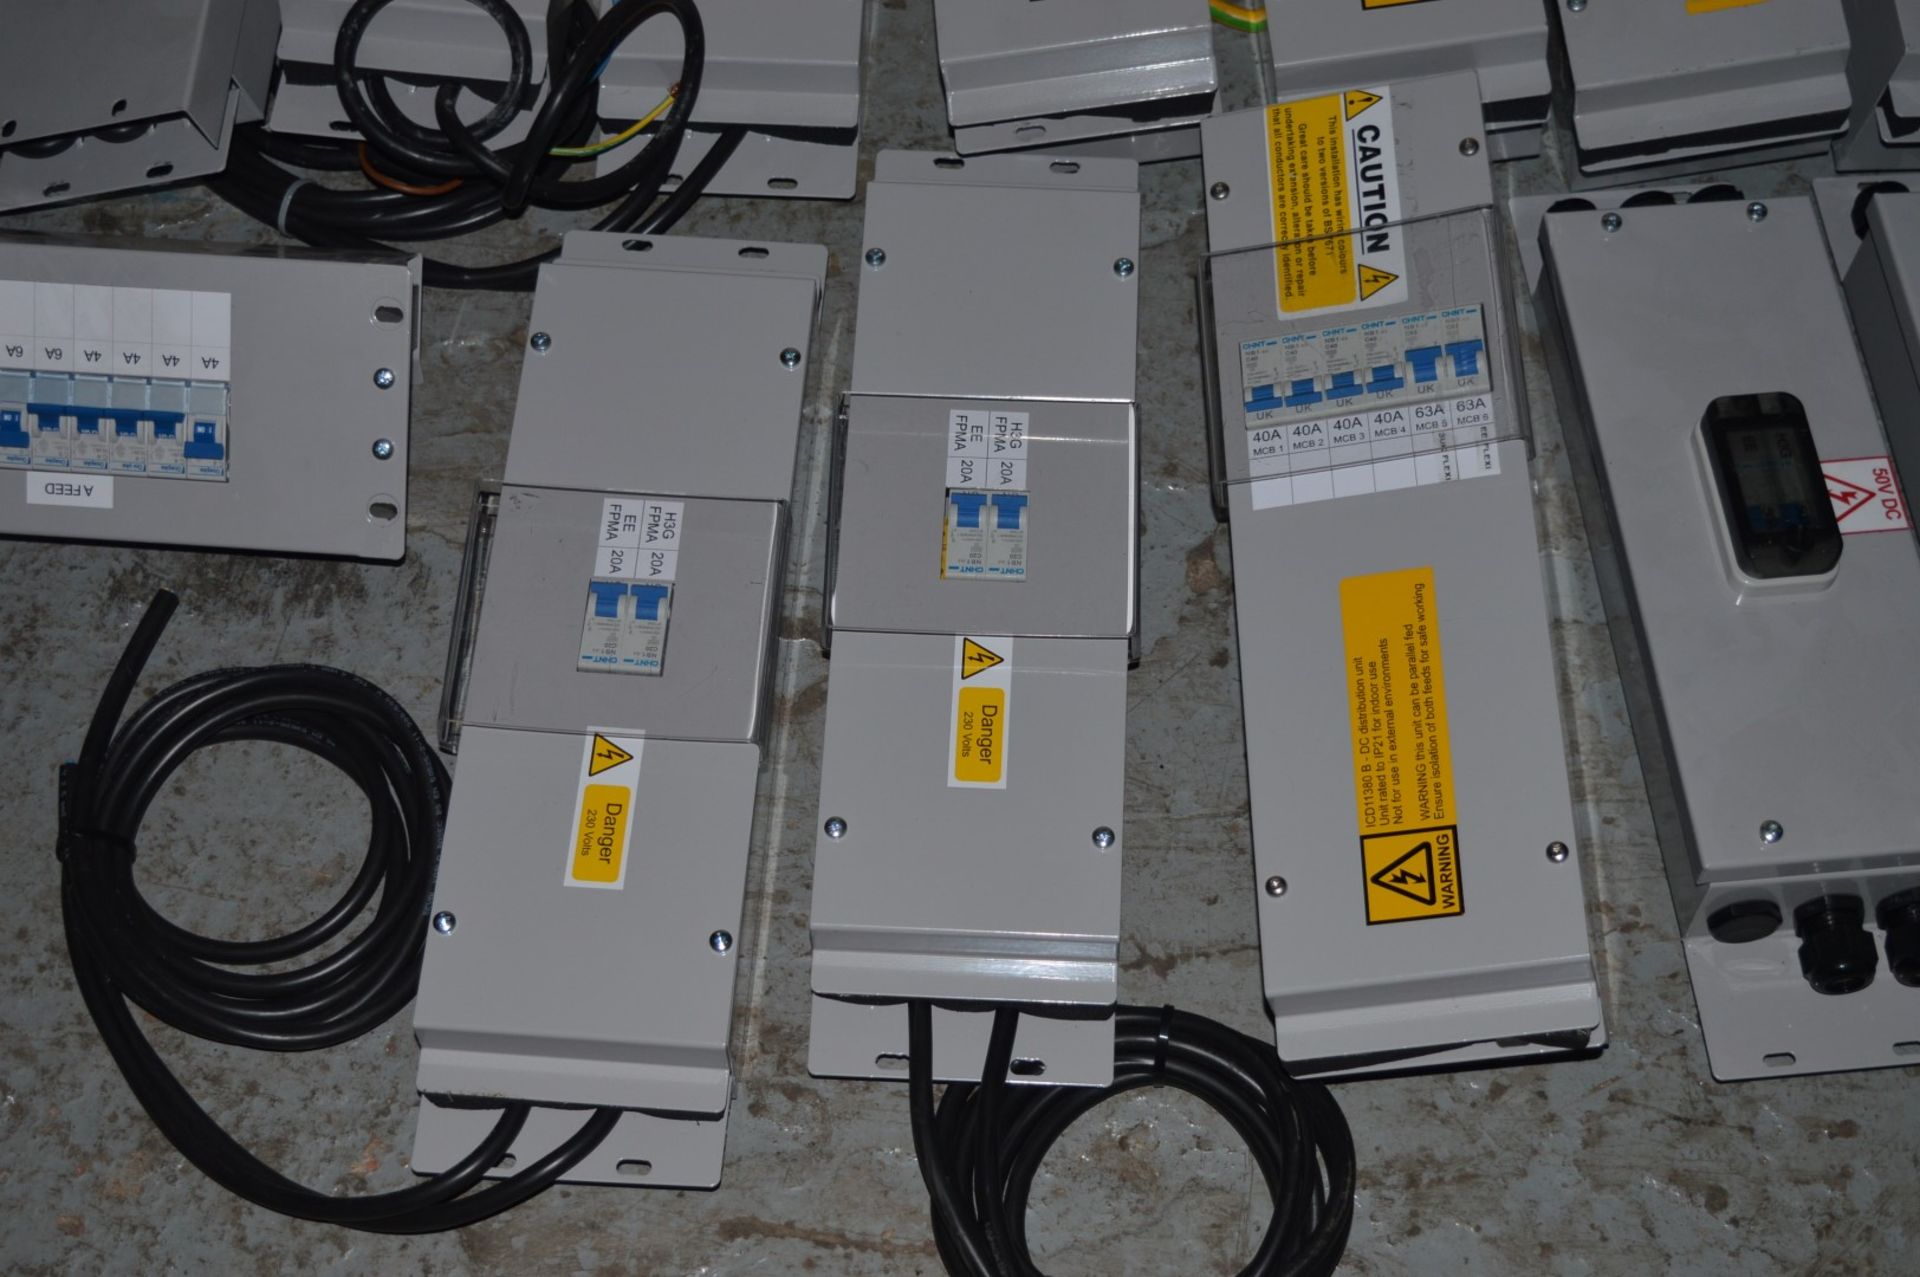 Assorted Lot of Electrical Industrial Products Including Switch Boxes, Circuit Breakers and Power - Image 4 of 21